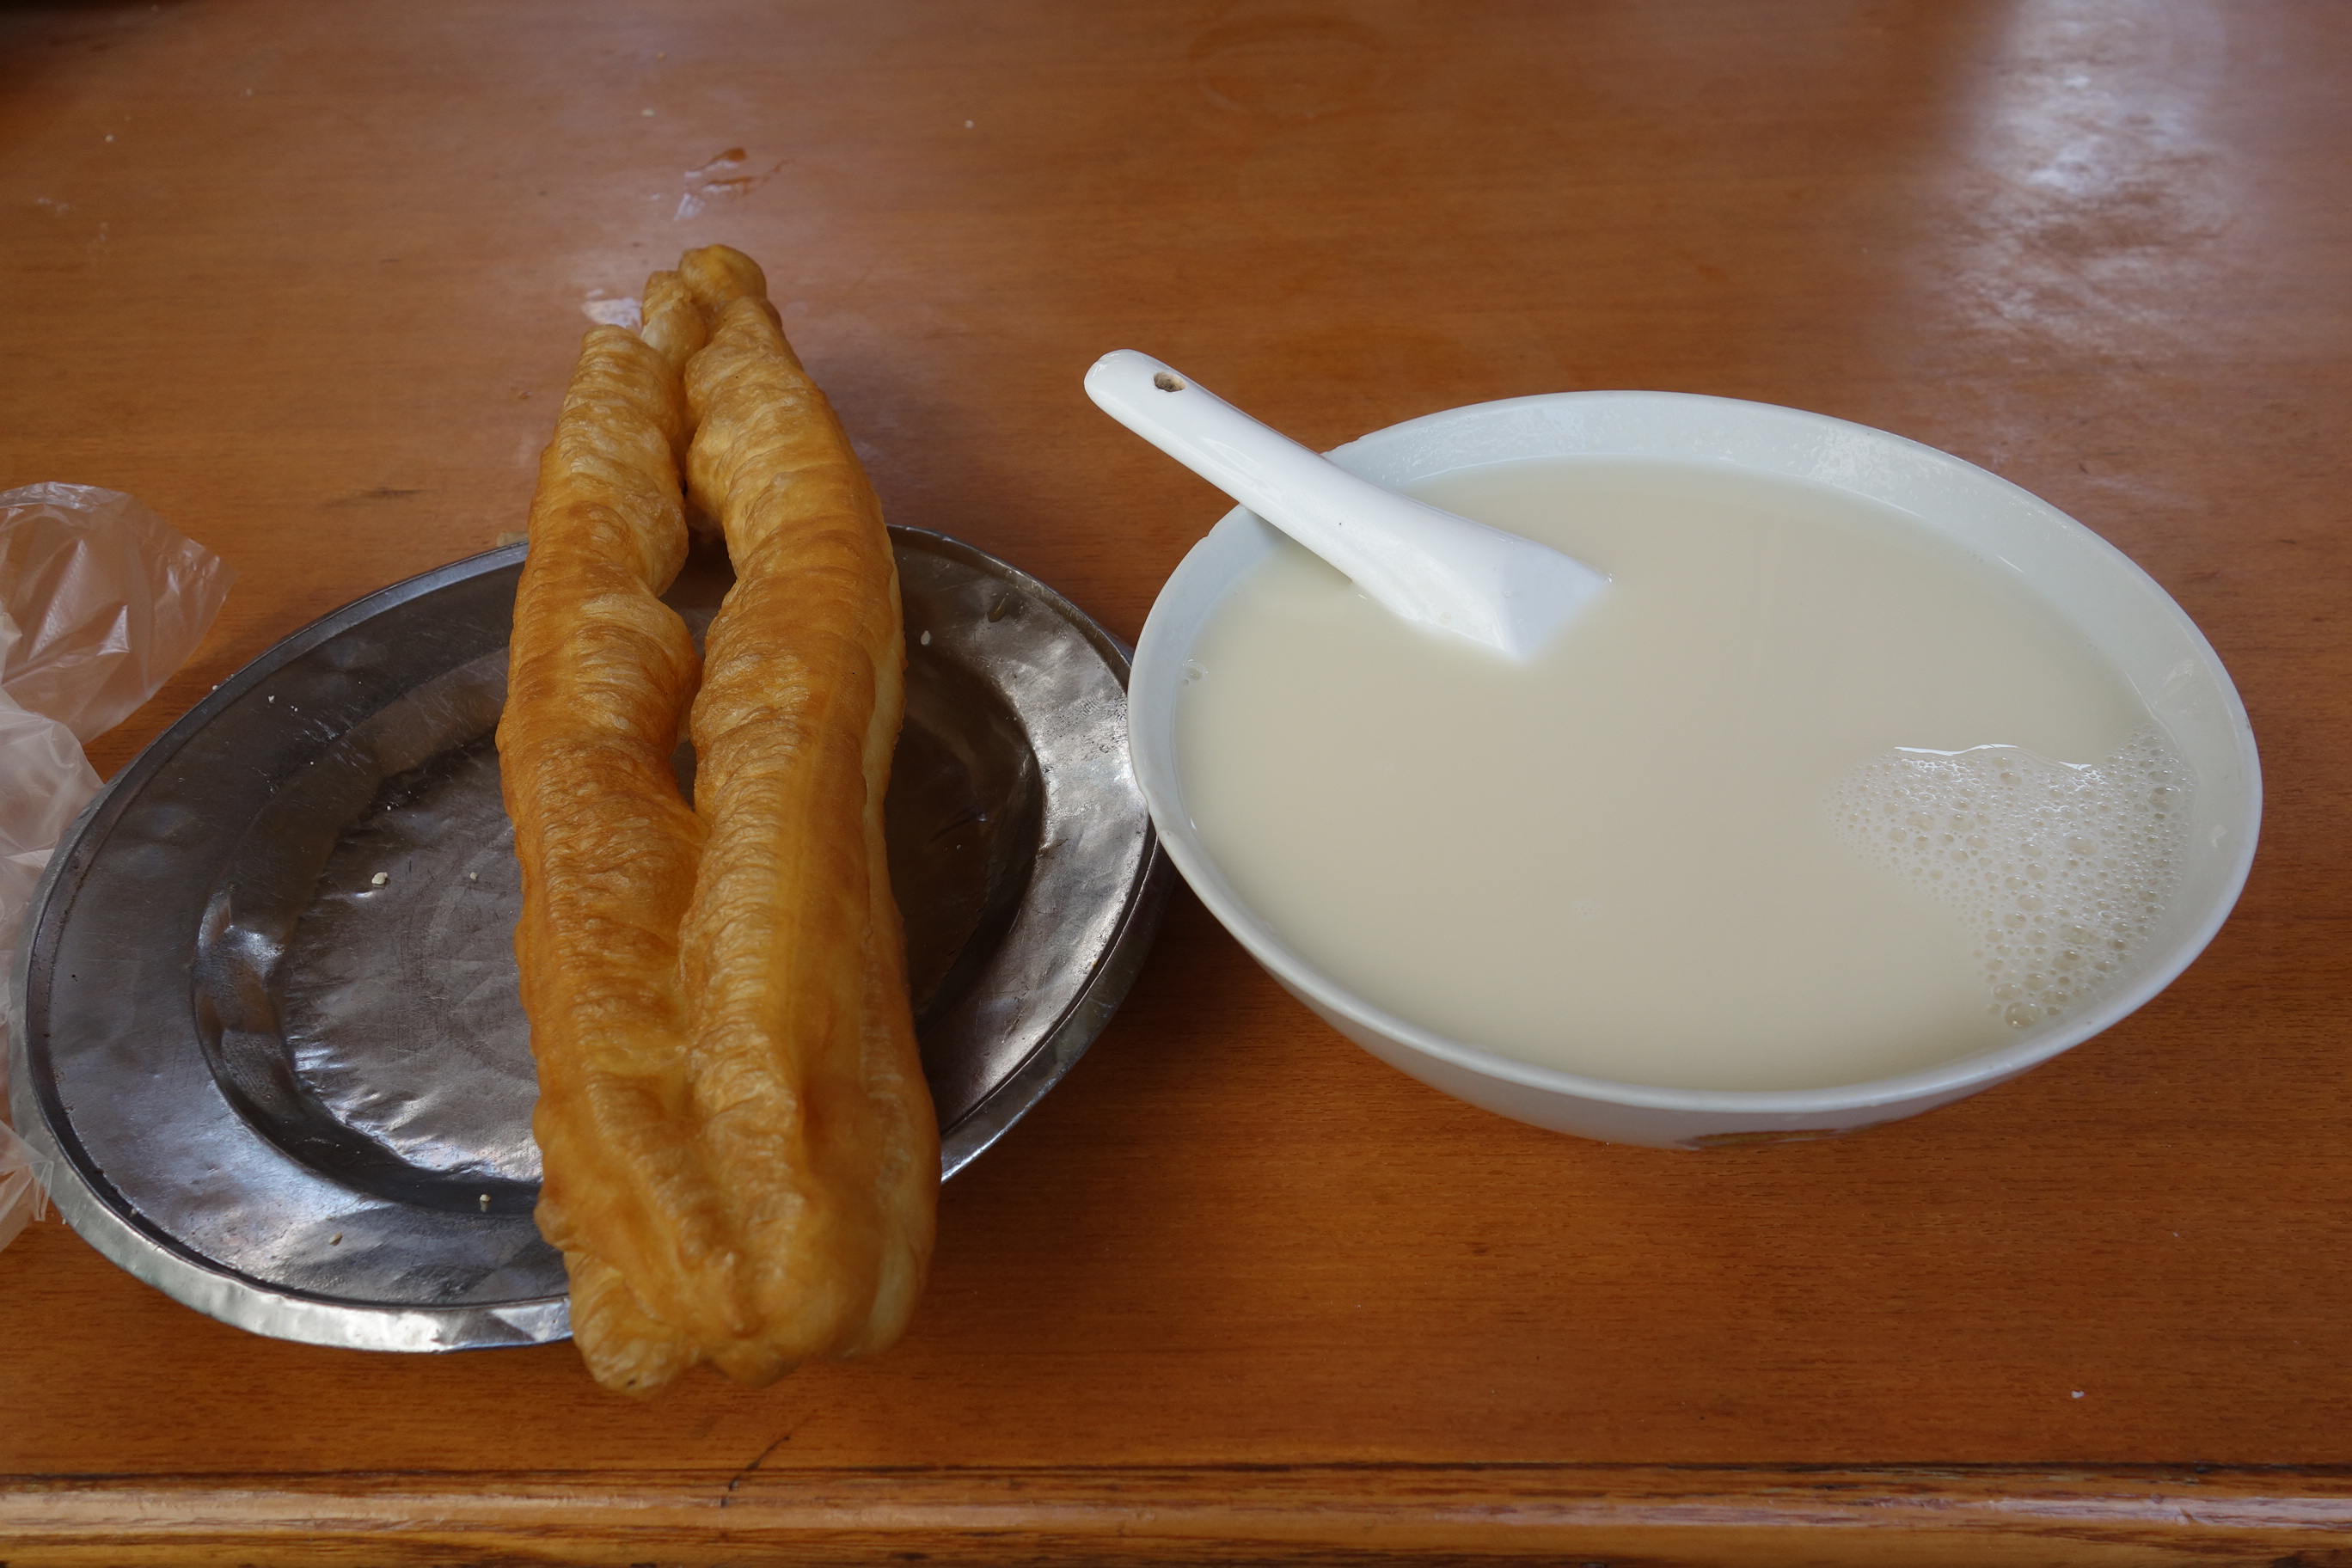 My soy milk and donut. Total cost: 2.4 yuan (~40 cents)